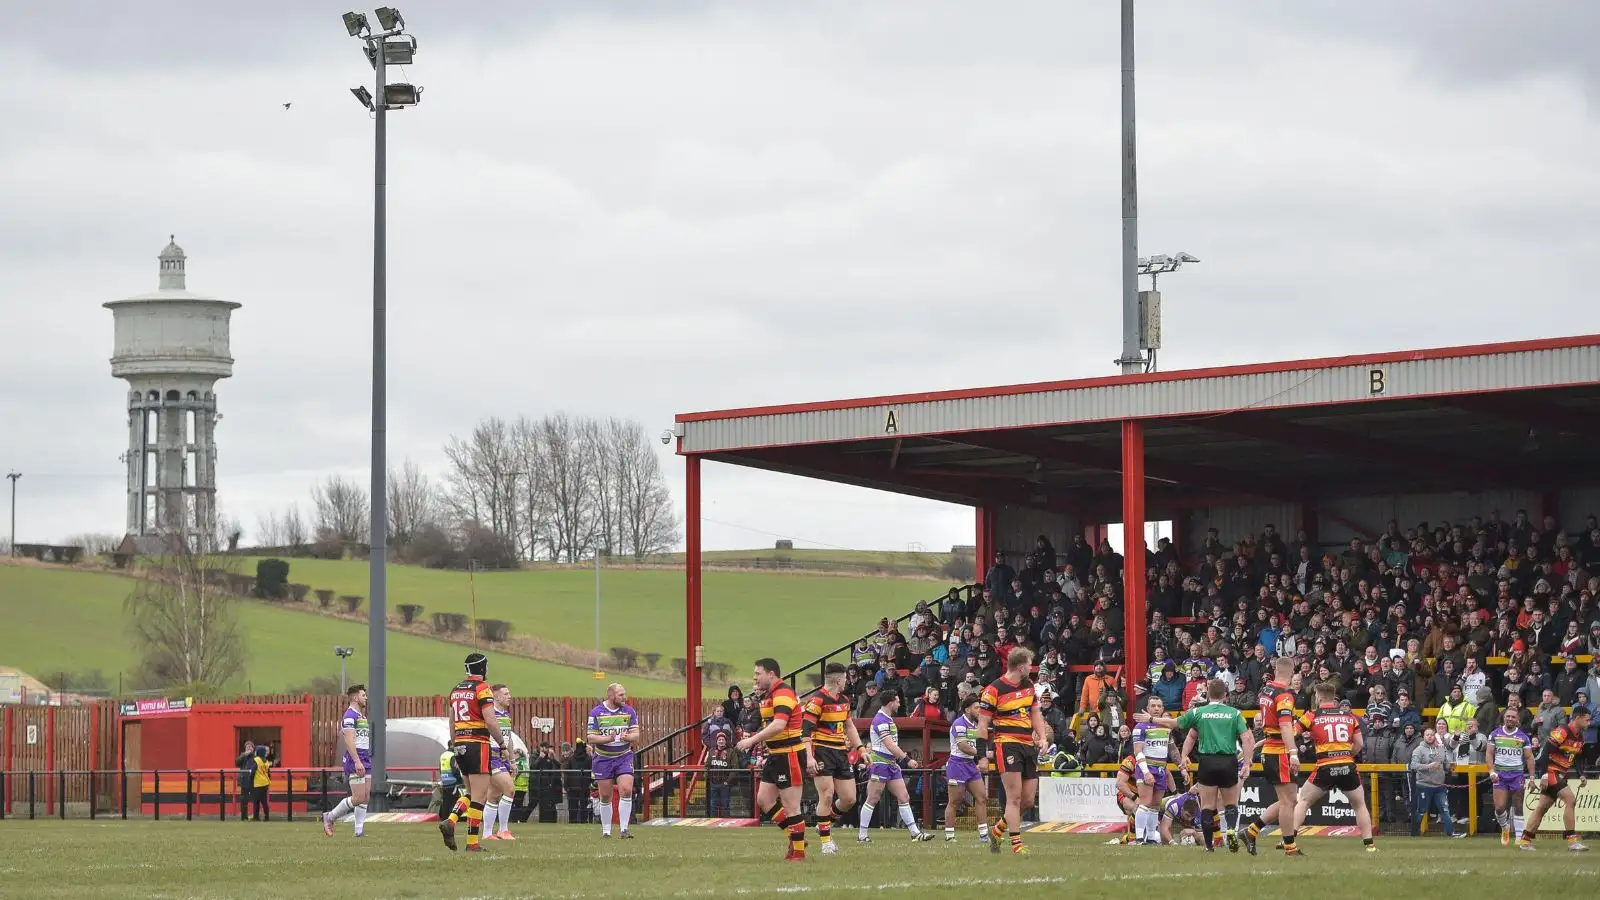 Dewsbury Rams take punt on versatile, exciting dual-code amateur star with experience Down Under